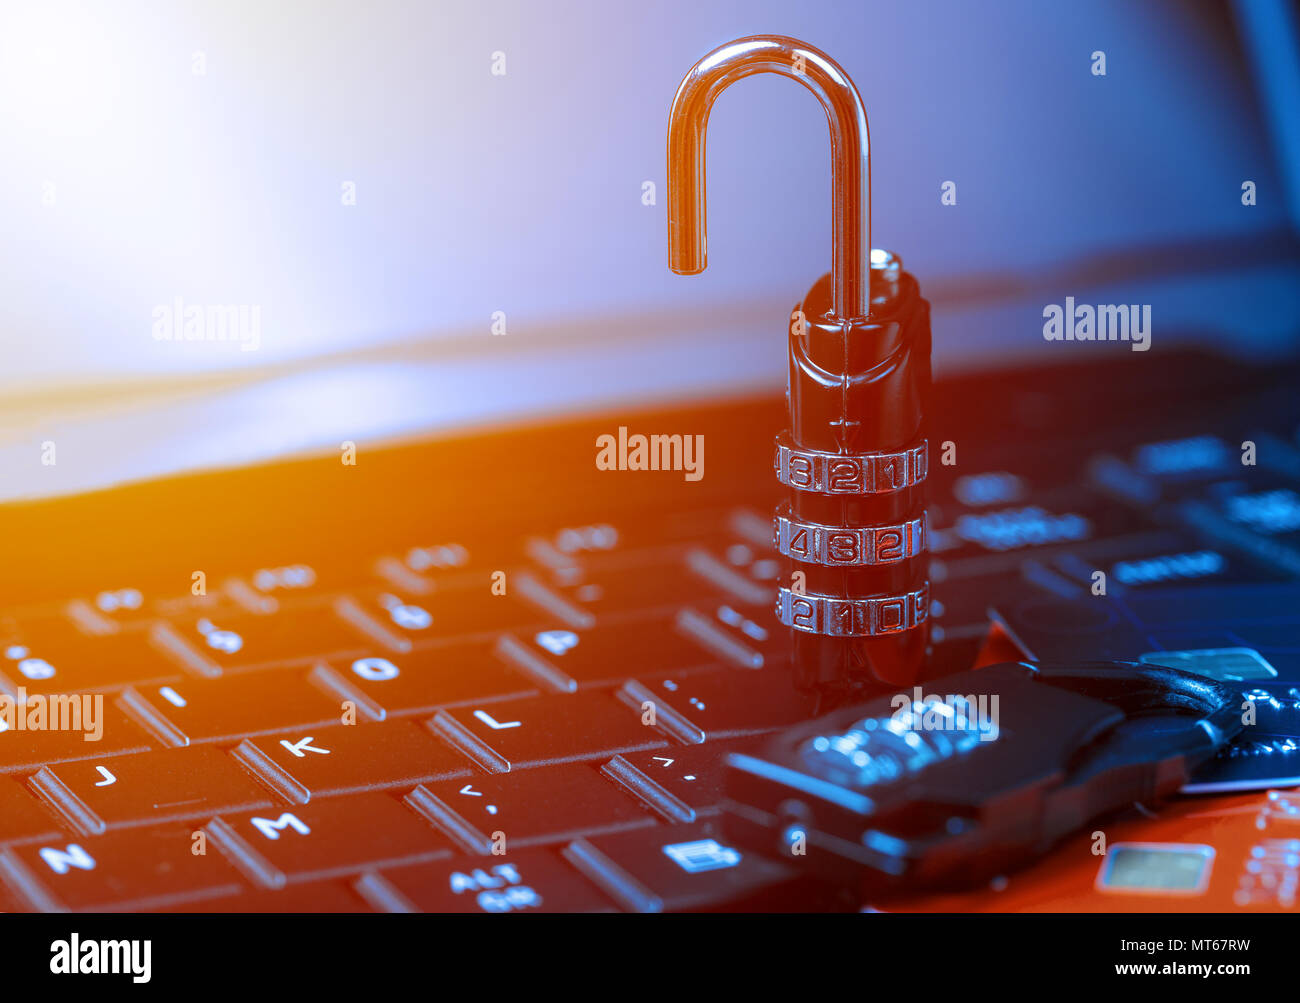 Online shopping concept with padlock open locked with cipher on laptop beside money cards. Non secure online shopping concept. Stock Photo